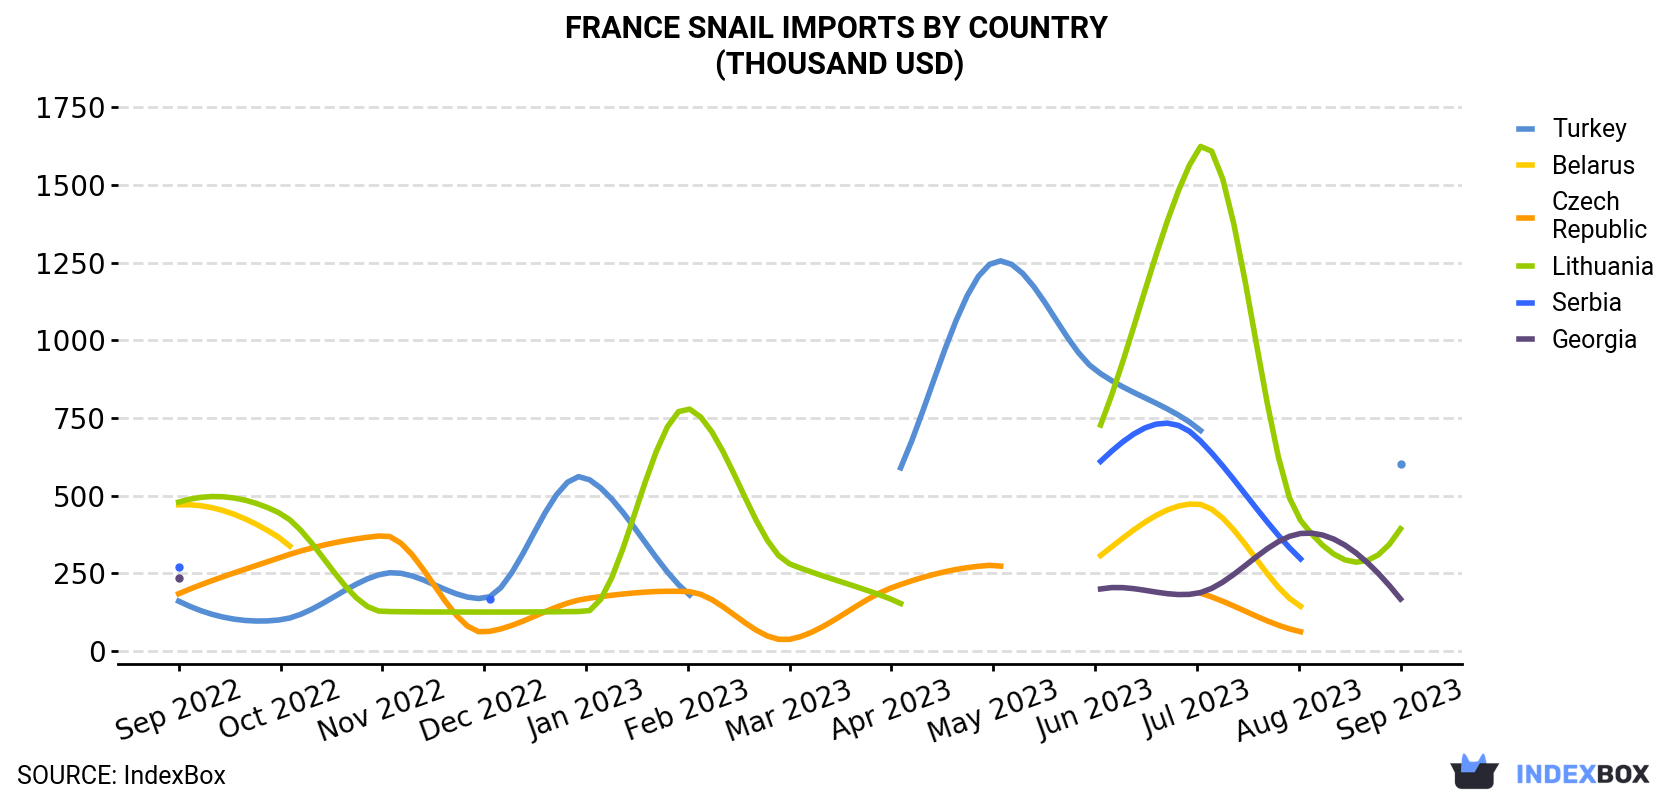 France Snail Imports By Country (Thousand USD)